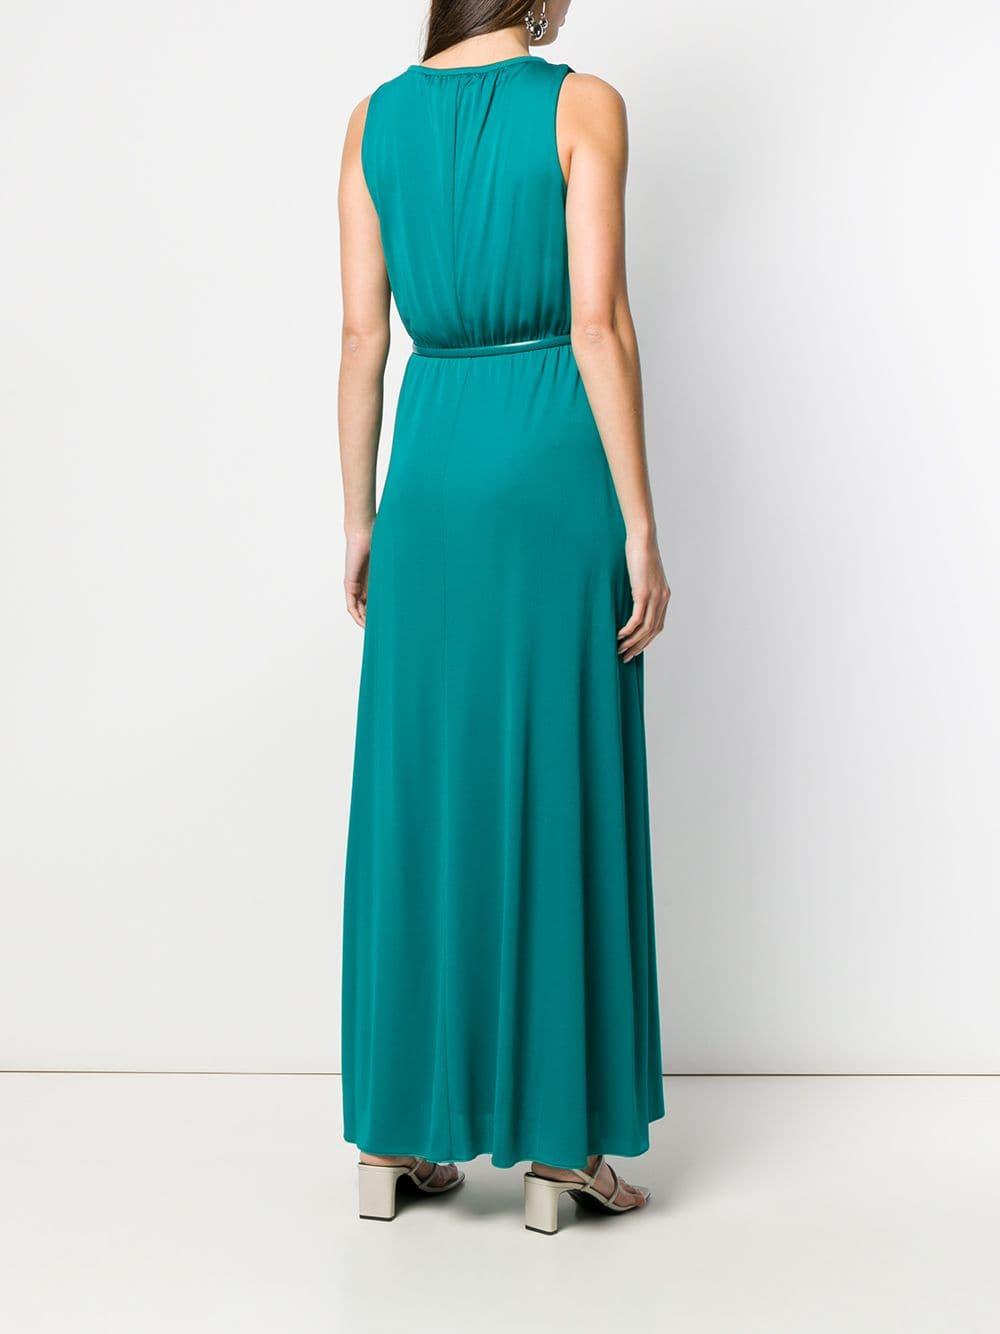 Max Mara Studio Synthetic Belted Maxi Dress in Green - Lyst